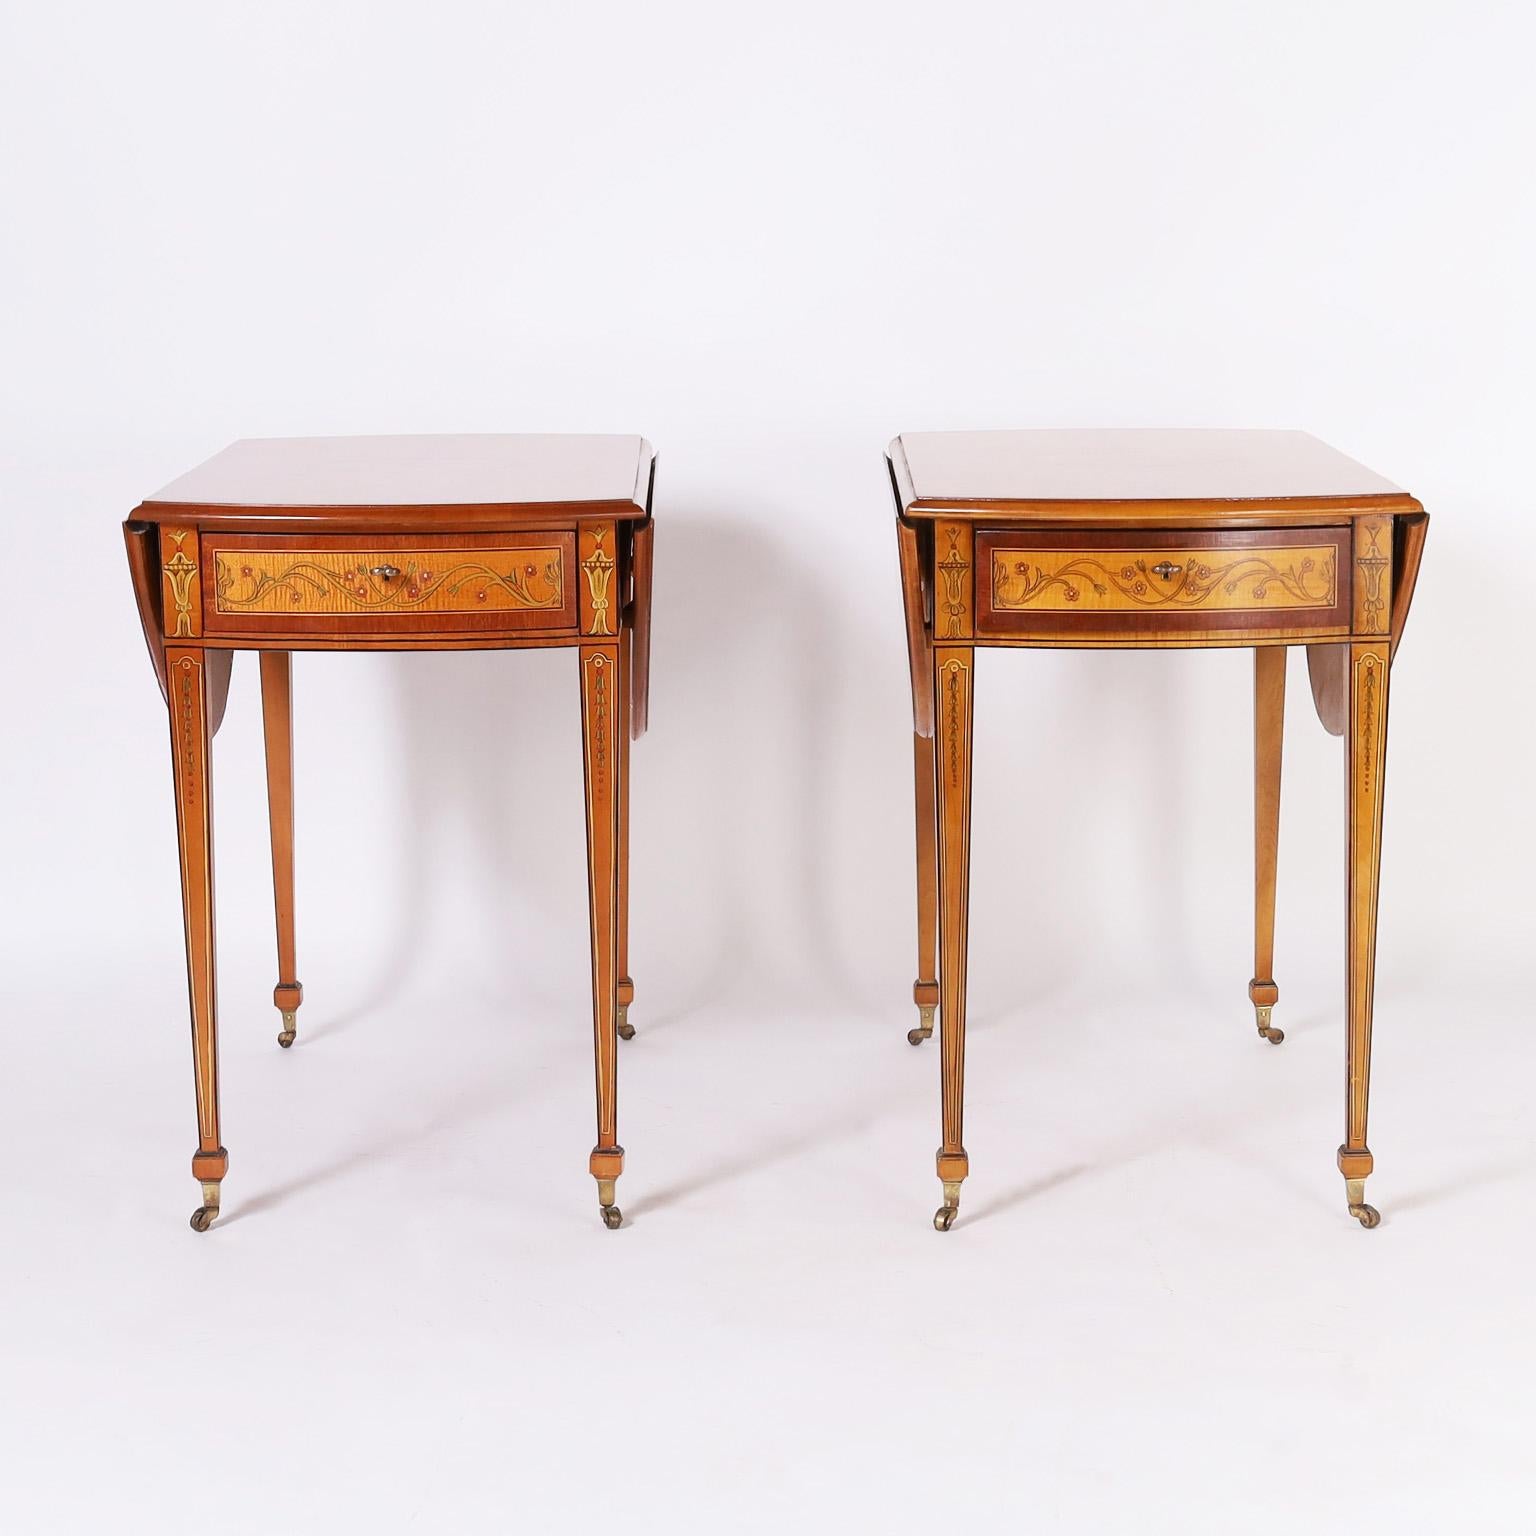 Dashing pair of one drawer drop leaf tables crafted in maple with mahogany cross banding in an elegant form with influences of Adam and Edwardian painted designs on long tapered legs with spade feet and brass casters. Tagged by the Historic New